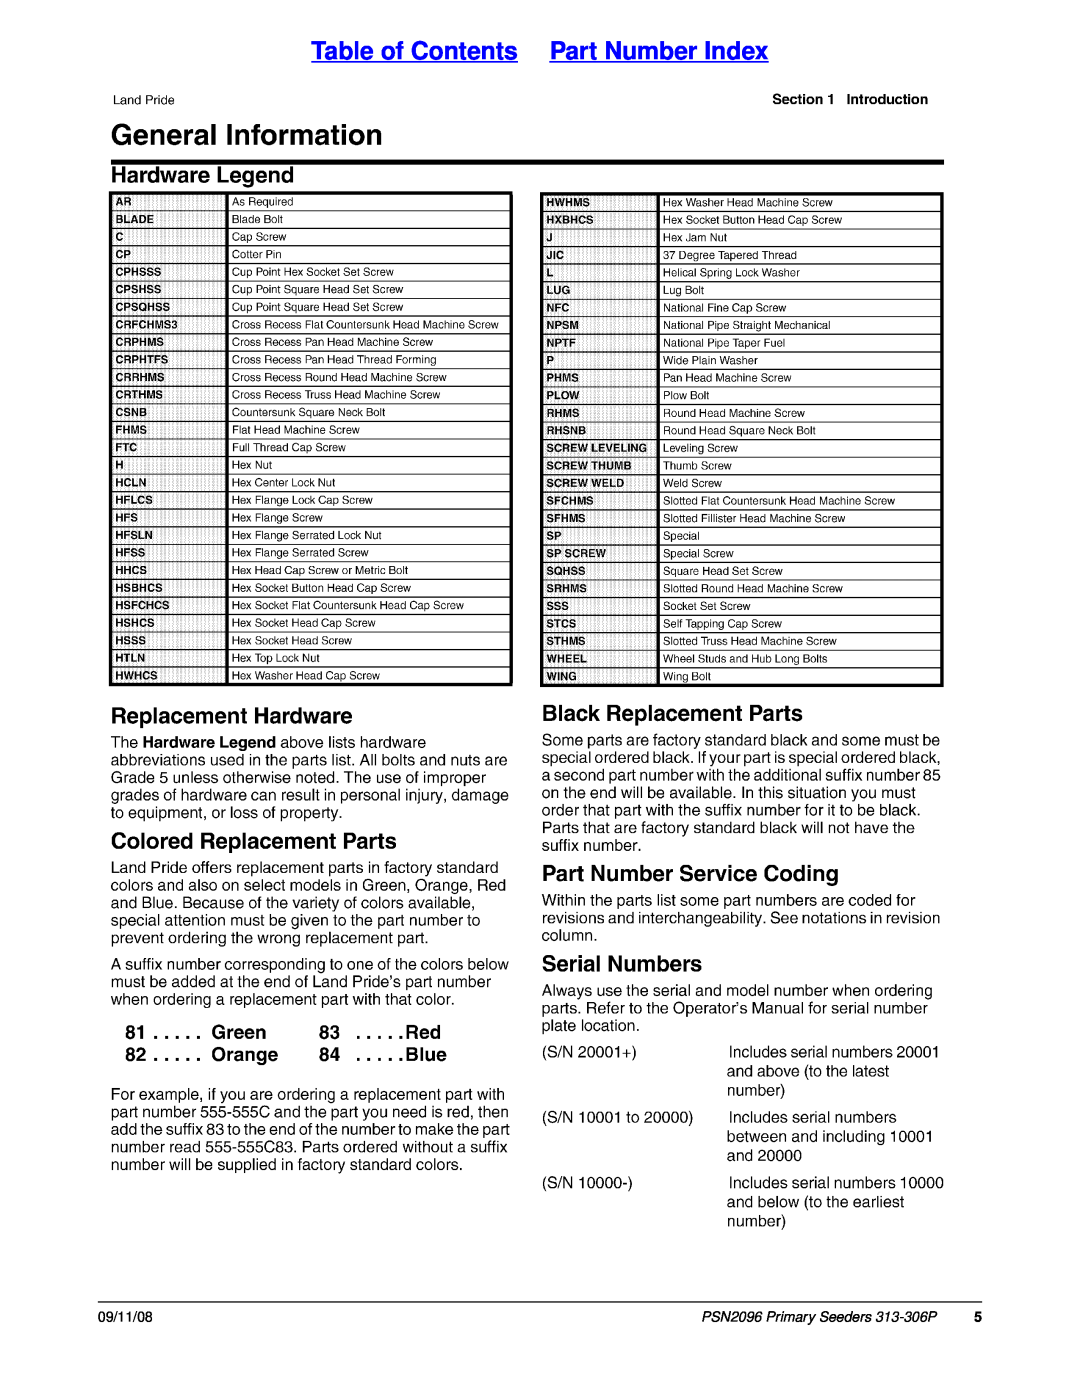 Land Pride 20583 manual Table of Contents Part Number Index, PSN2096 Primary Seeders 313-306P, 09/11/08 